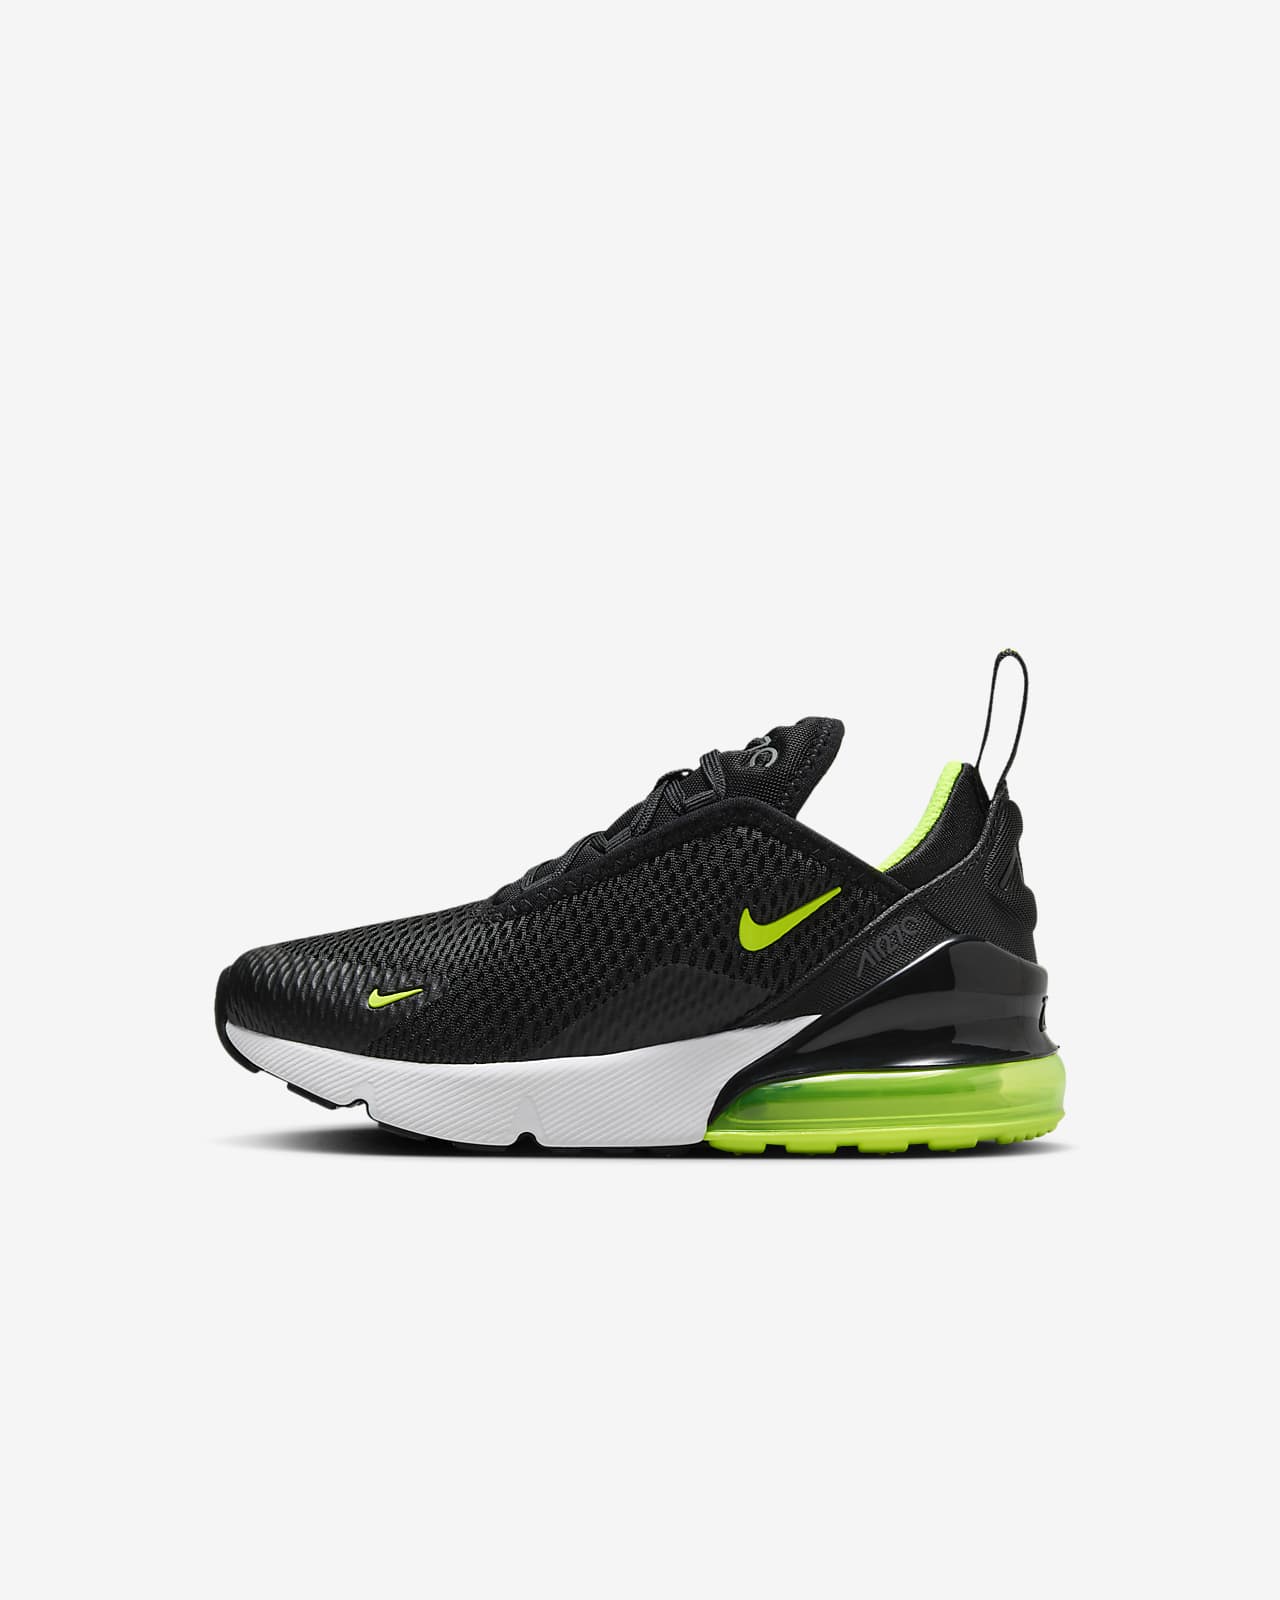 Nike Air Max 270 Younger Kids' Shoes